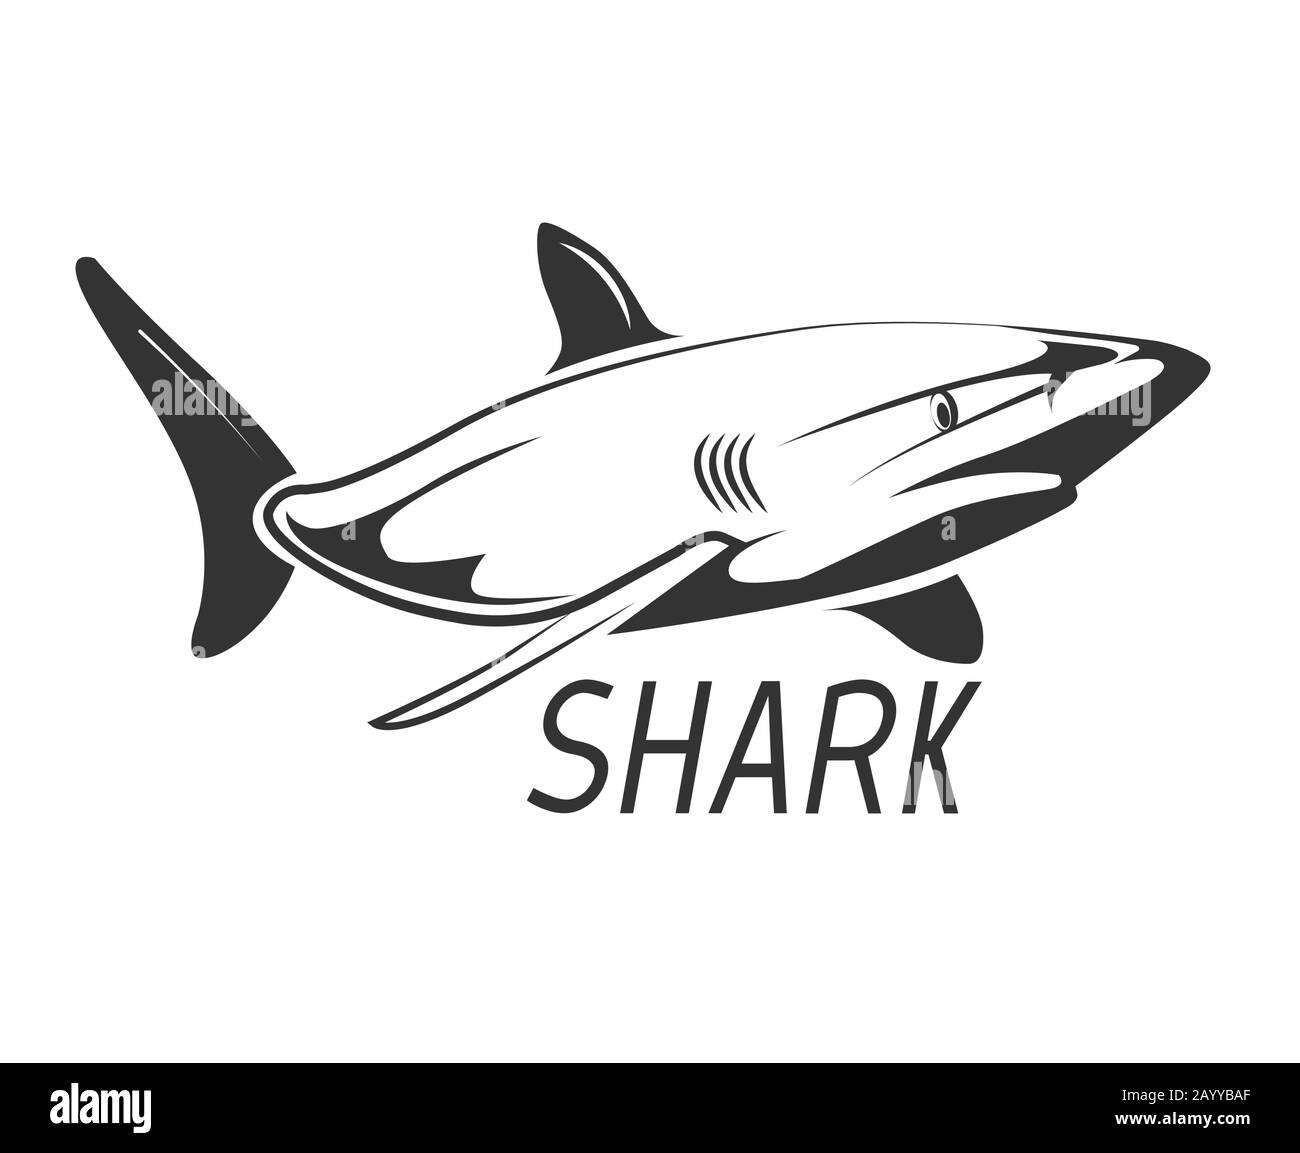 Great White Shark Silhouette PNG And Vector Images Free Download - Pngtree